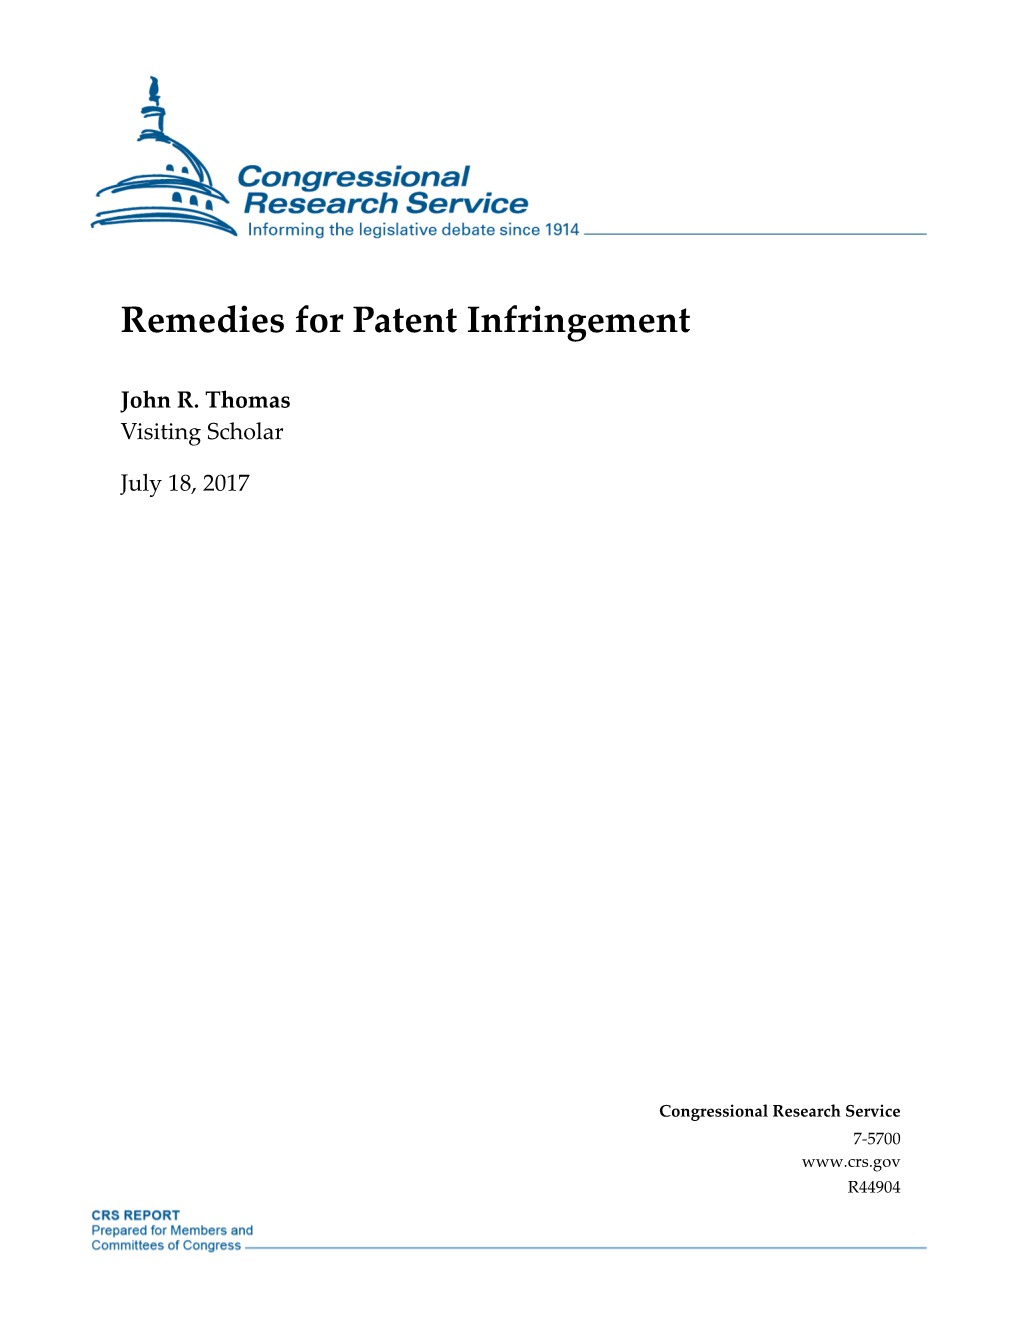 Remedies for Patent Infringement